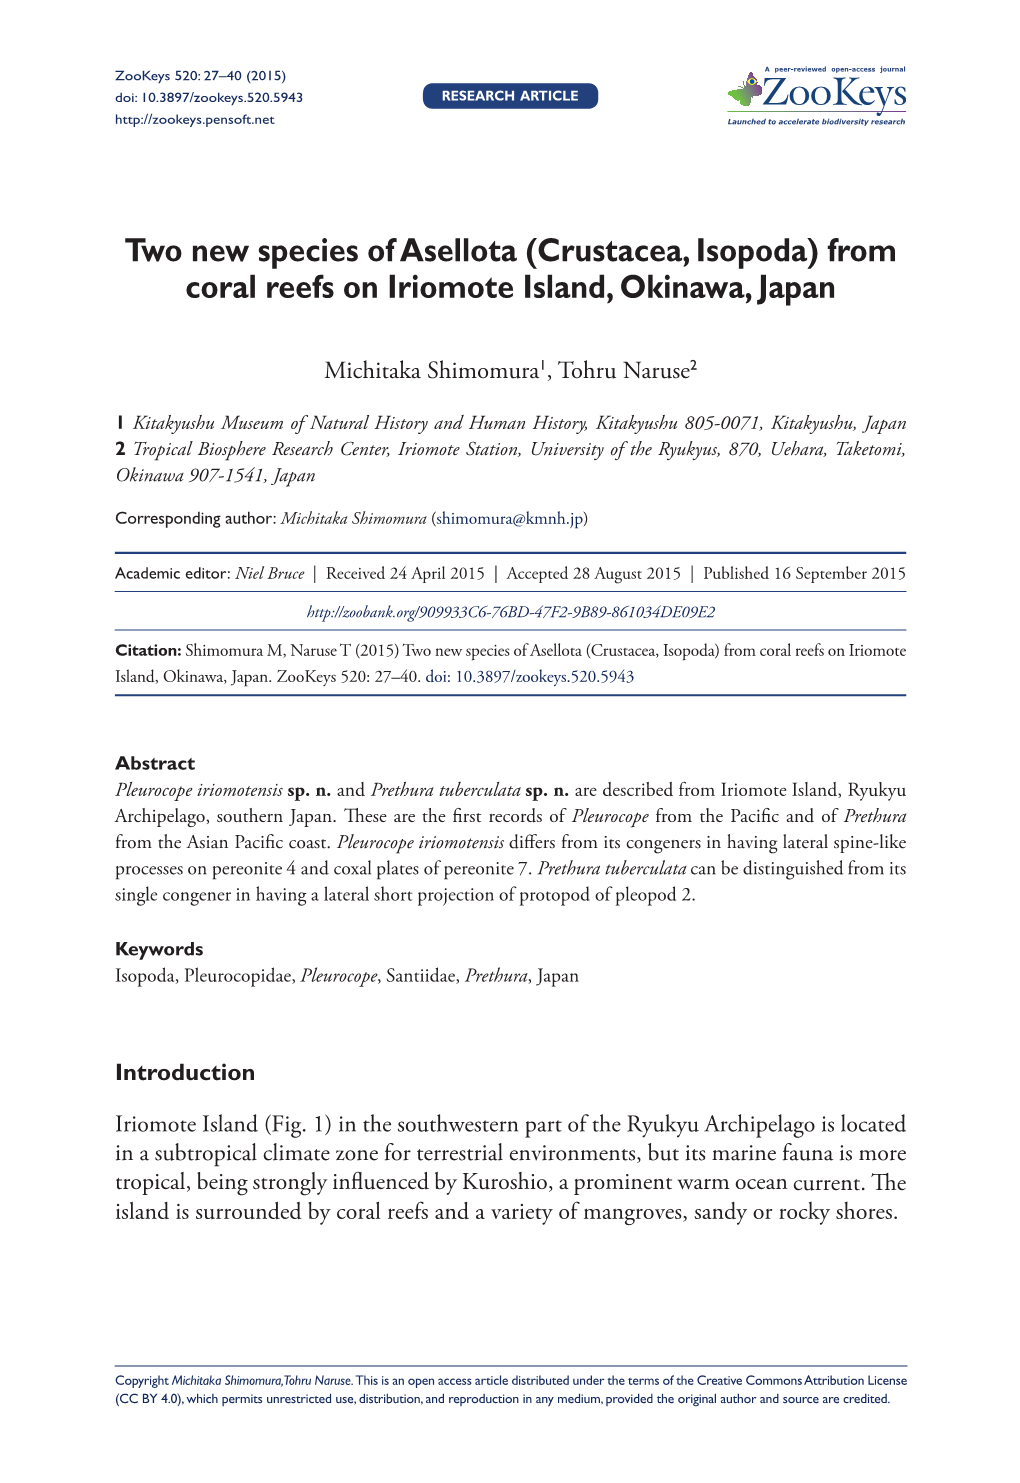 Two New Species of Asellota (Crustacea, Isopoda) from Coral Reefs on Iriomote Island, Okinawa, Japan